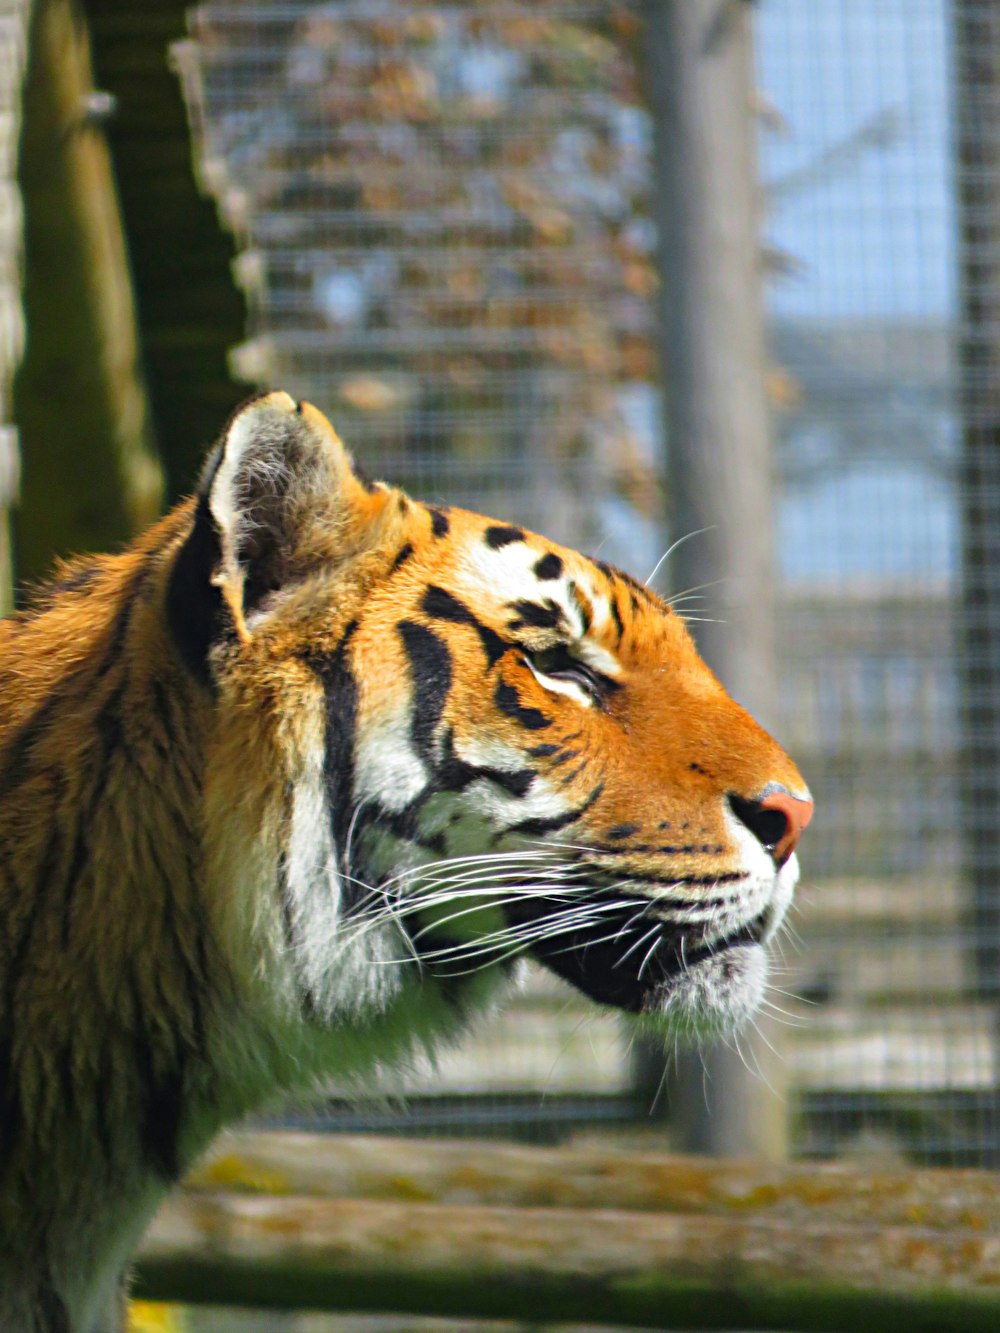 tiger in cage during daytime